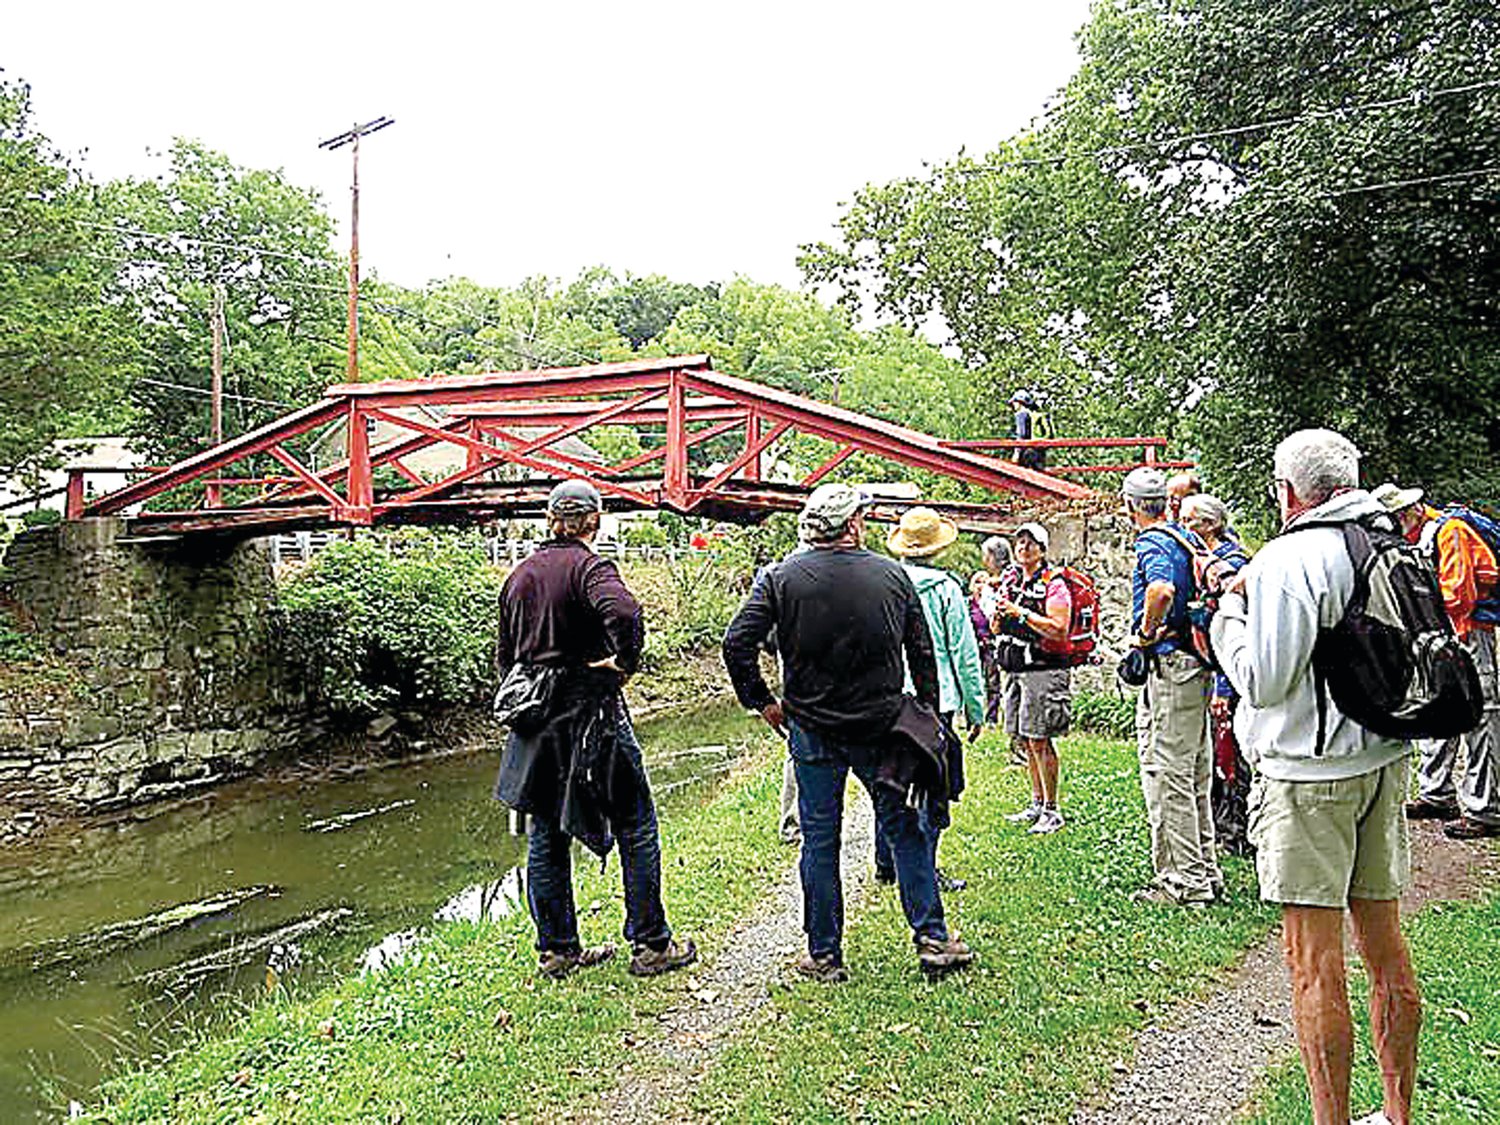 Friends of the Delaware Canal begins its annual 58.9-mile canal walk Saturday, with the first of six shorter sections, rather than the traditional five.